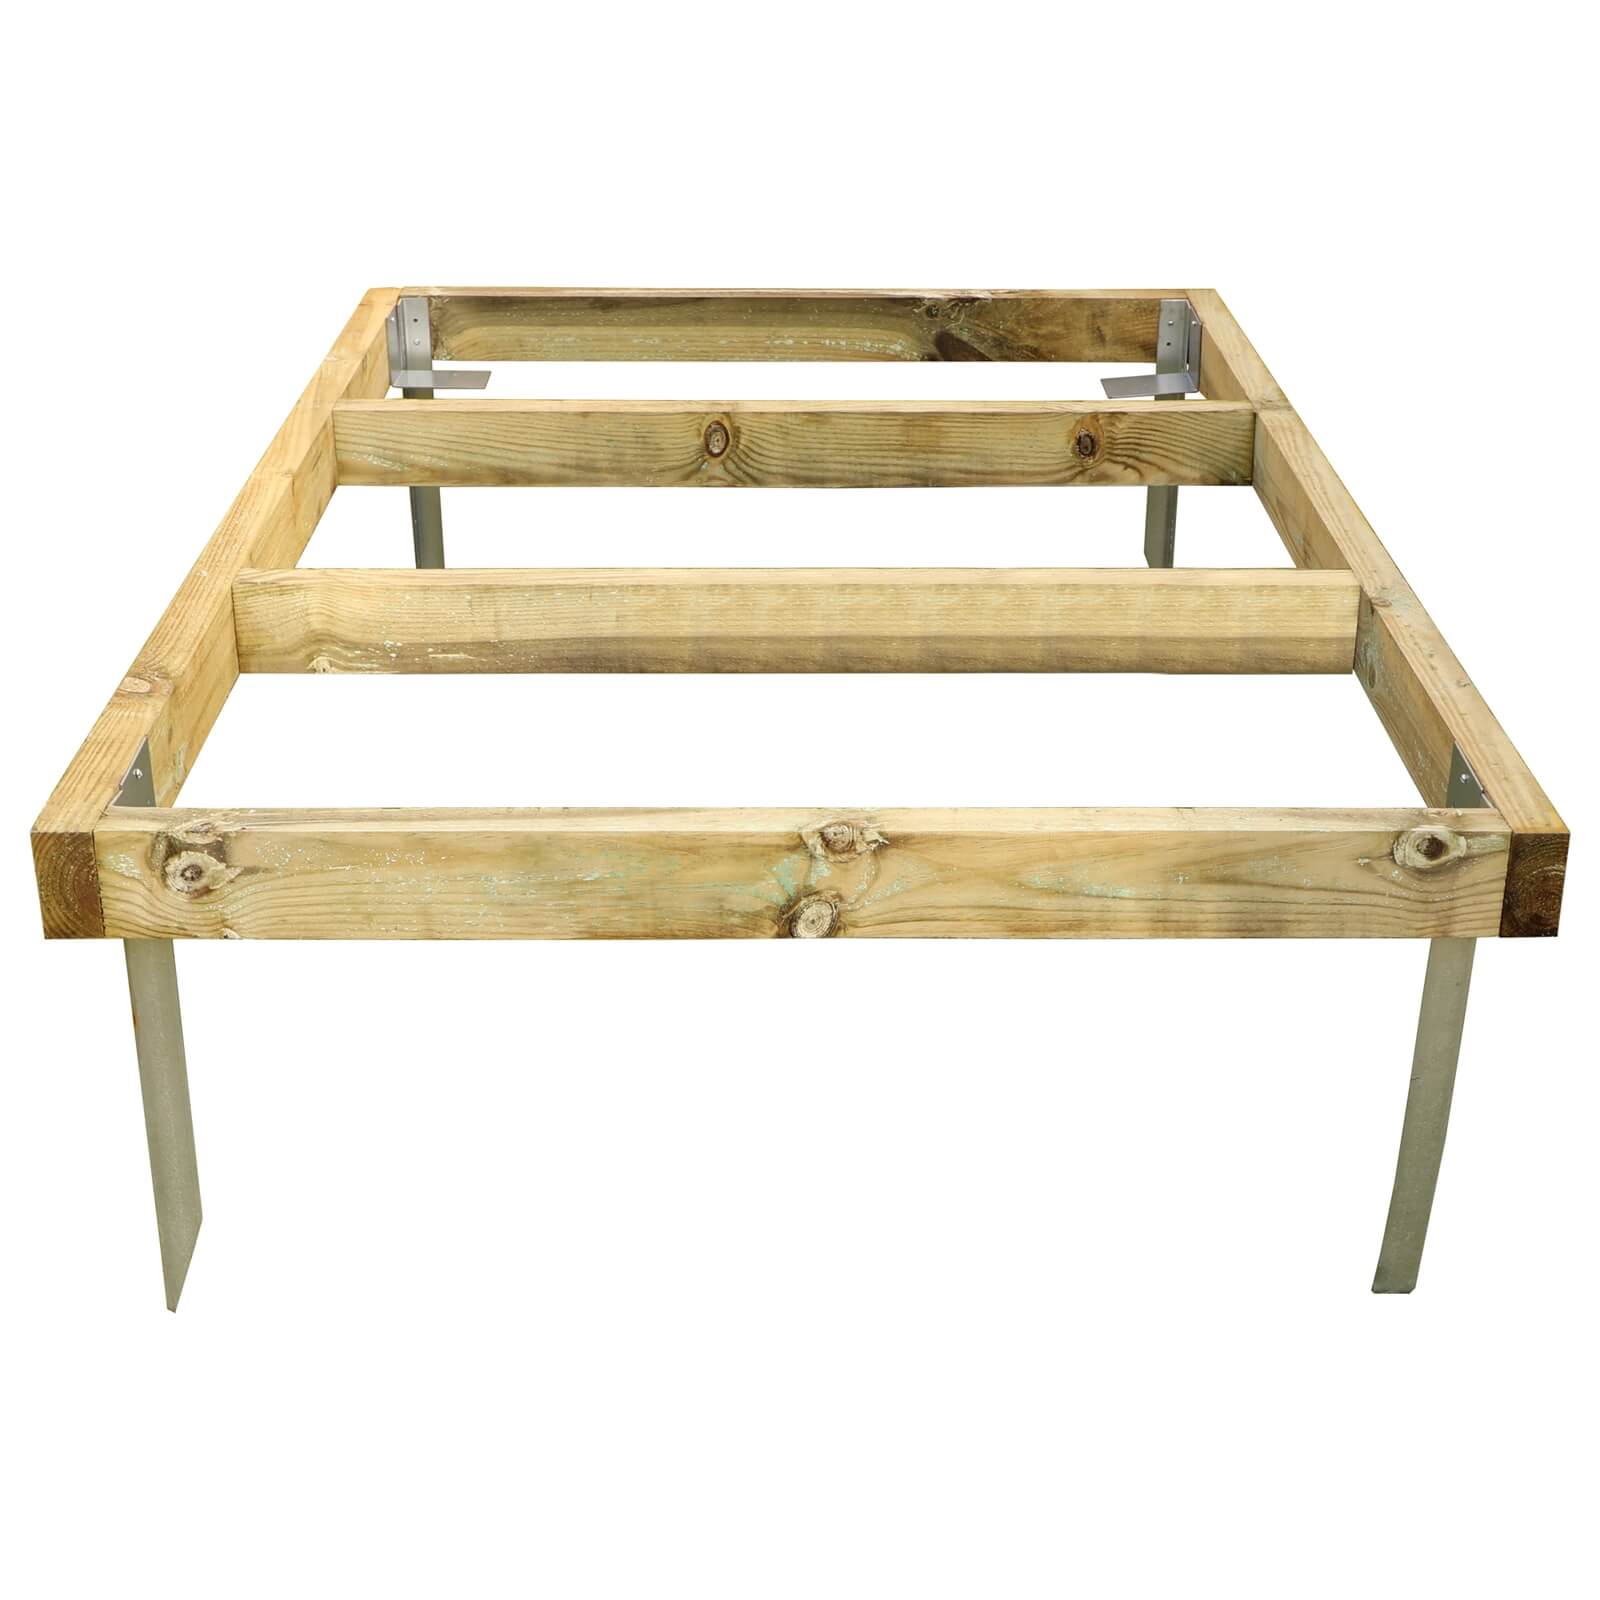 Mercia 6x4ft Pressure Treated Wooden Shed Base - Installation Included